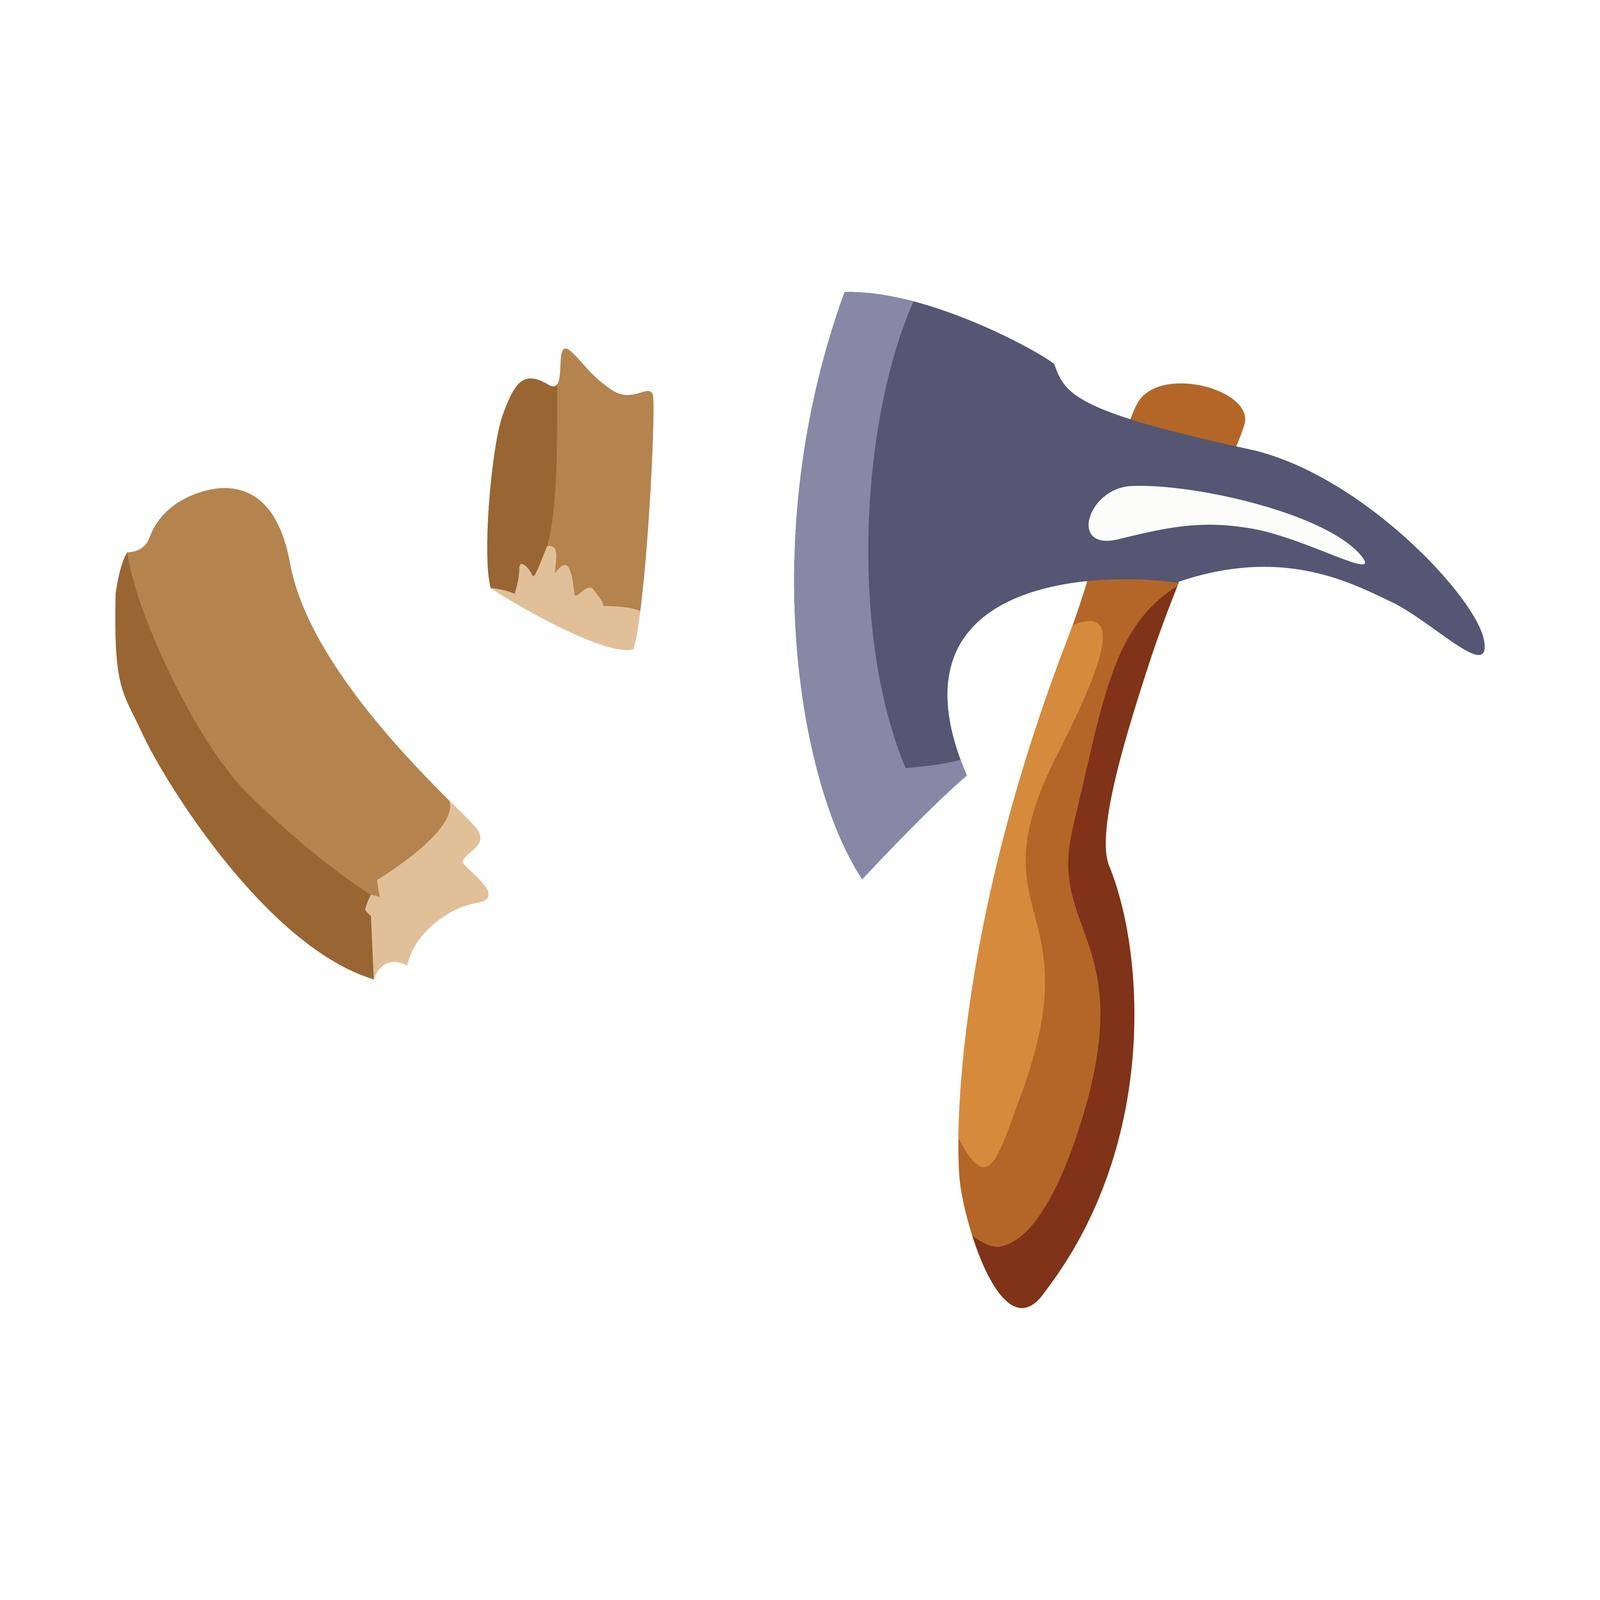 An axe with a wooden handle, which cuts wood vector illustration by ANITA